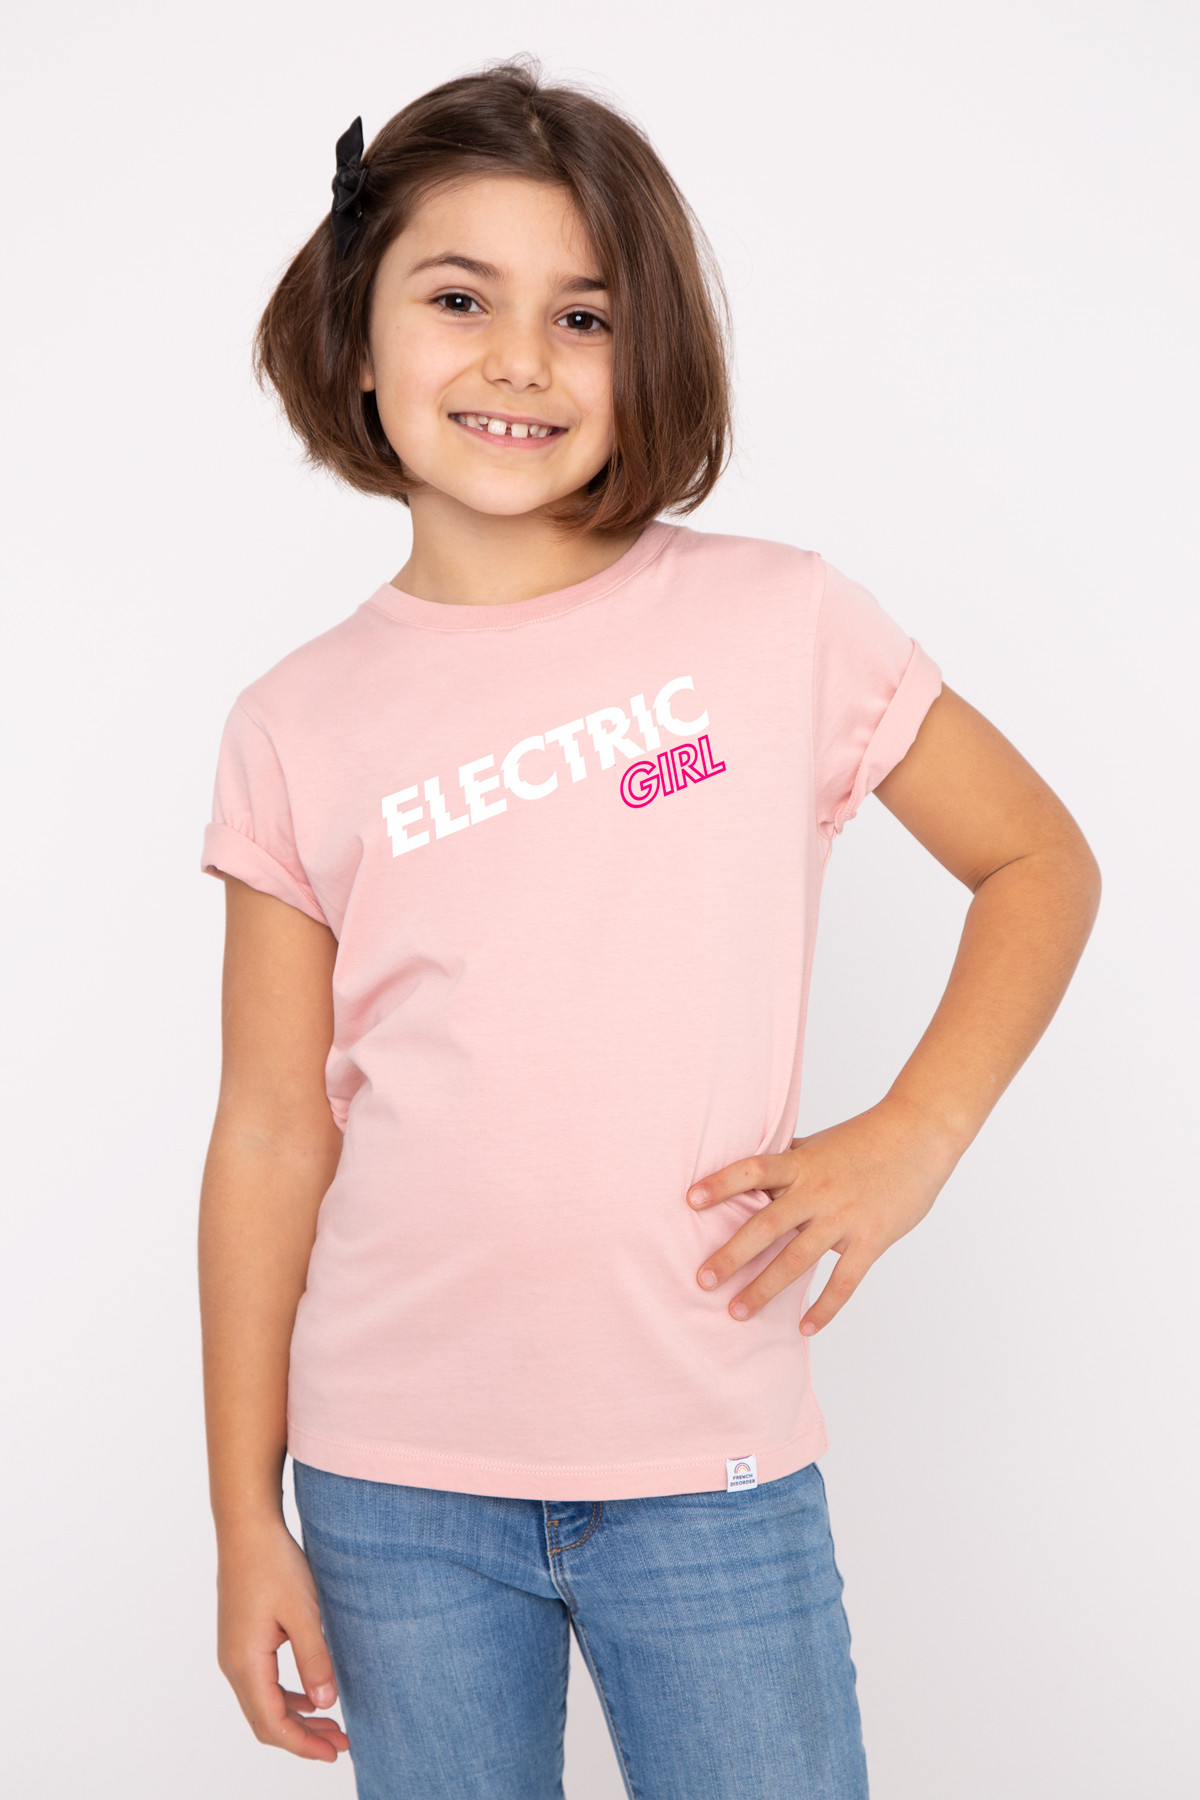 Tshirt ELECTRIC GIRL French Disorder